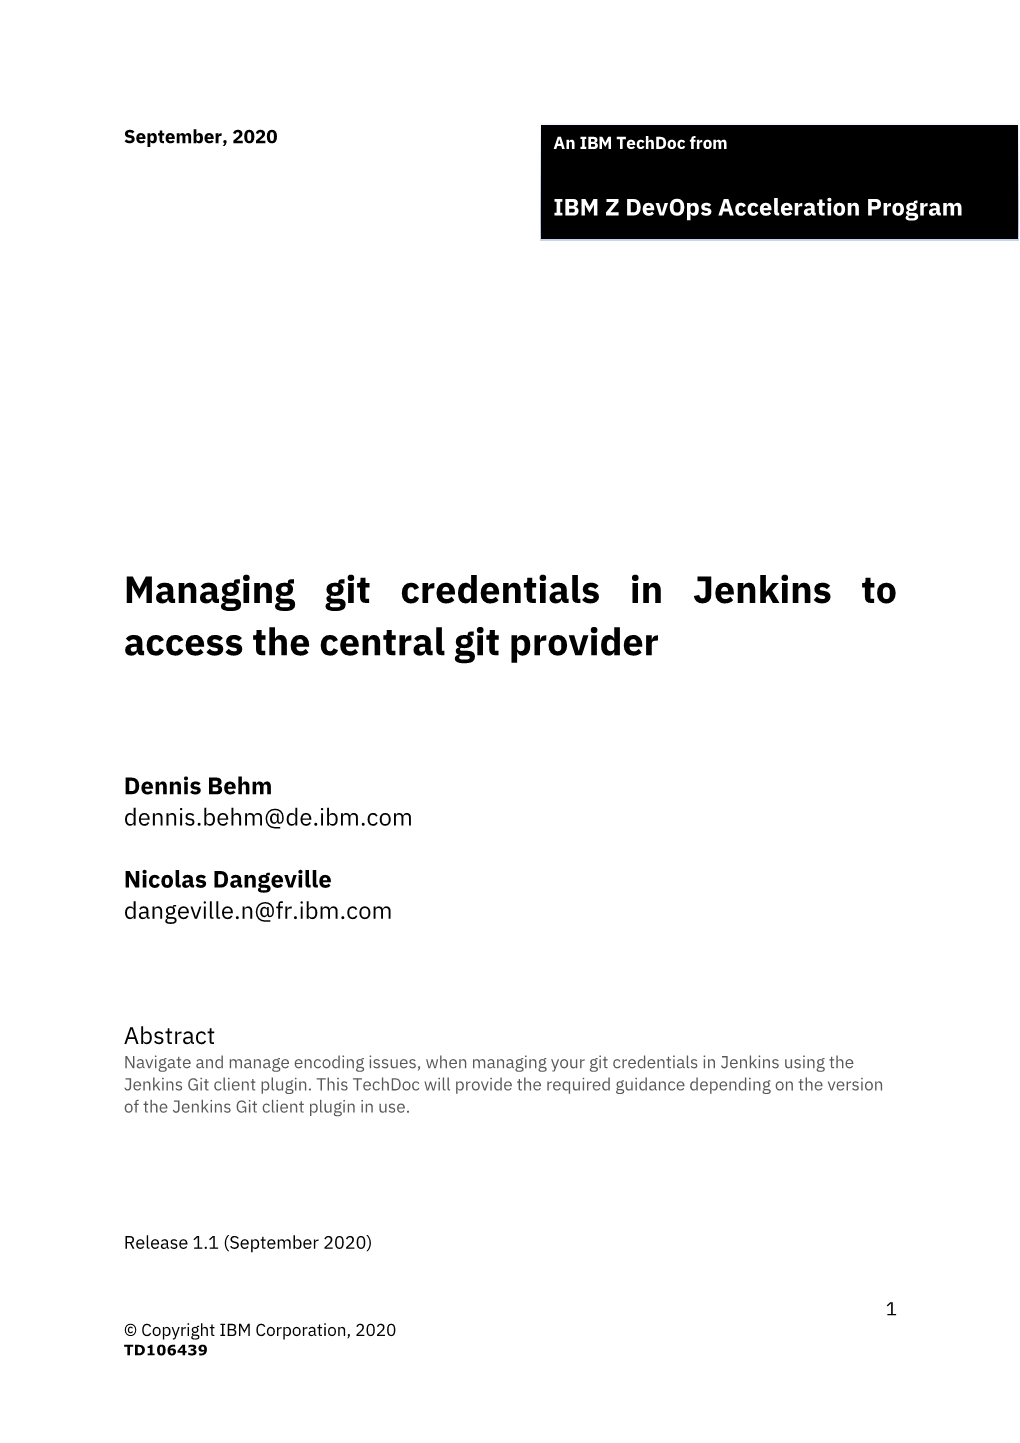 Managing Git Credentials in Jenkins to Access the Central Git Provider